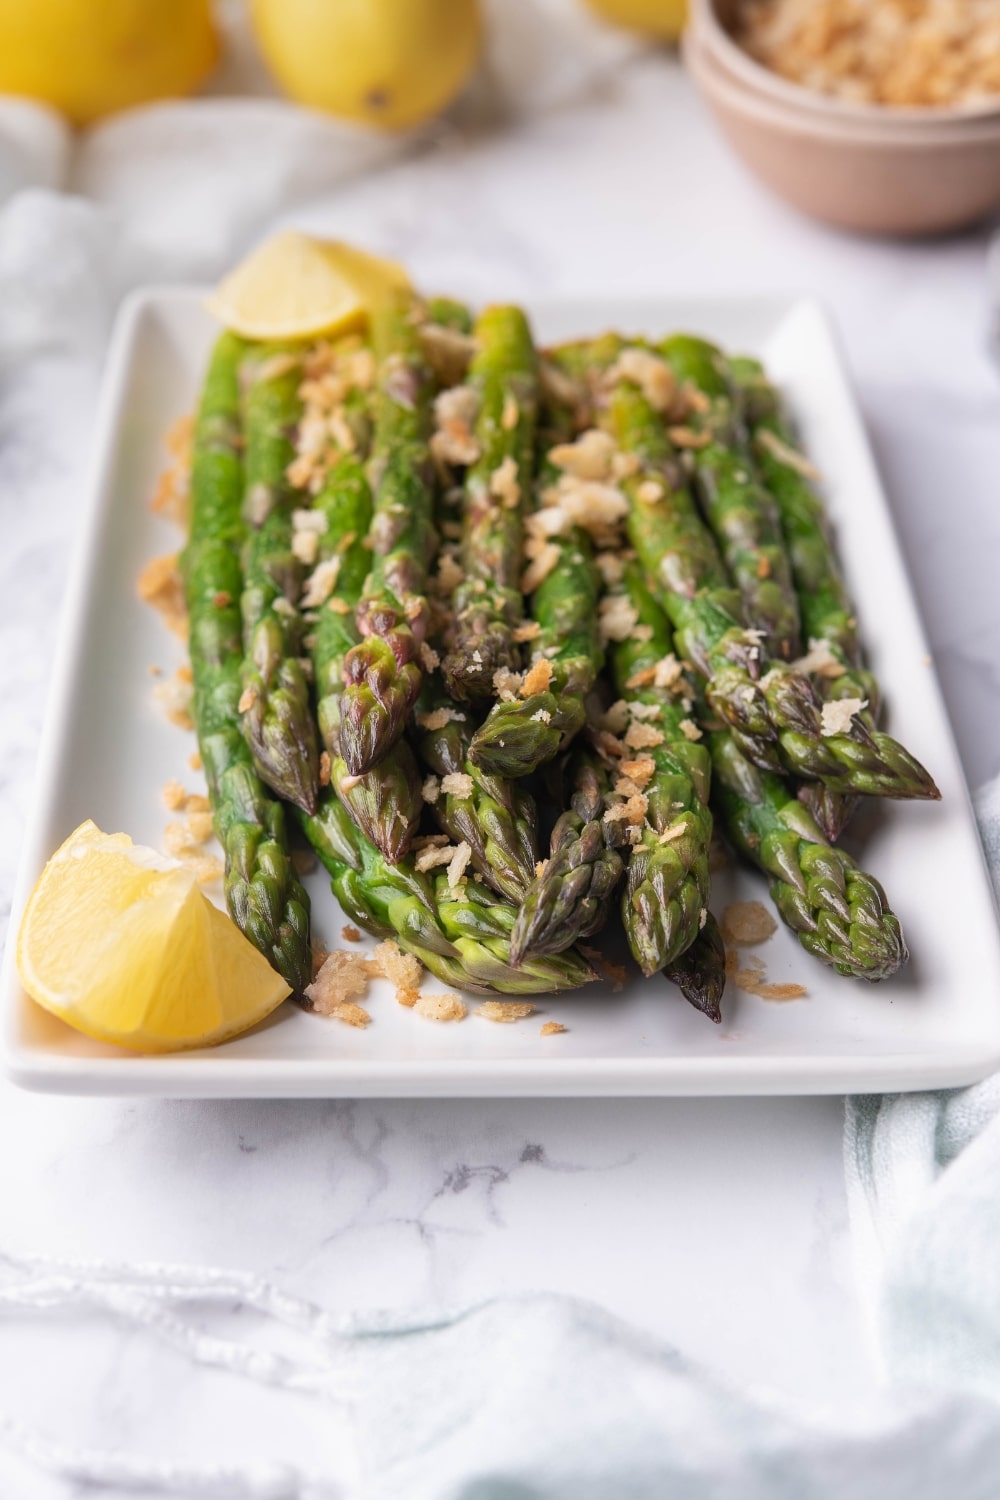 Sauteed asparagus garnished with panko breadcrumbs and served with lemon wedges on a rectangle white plate.